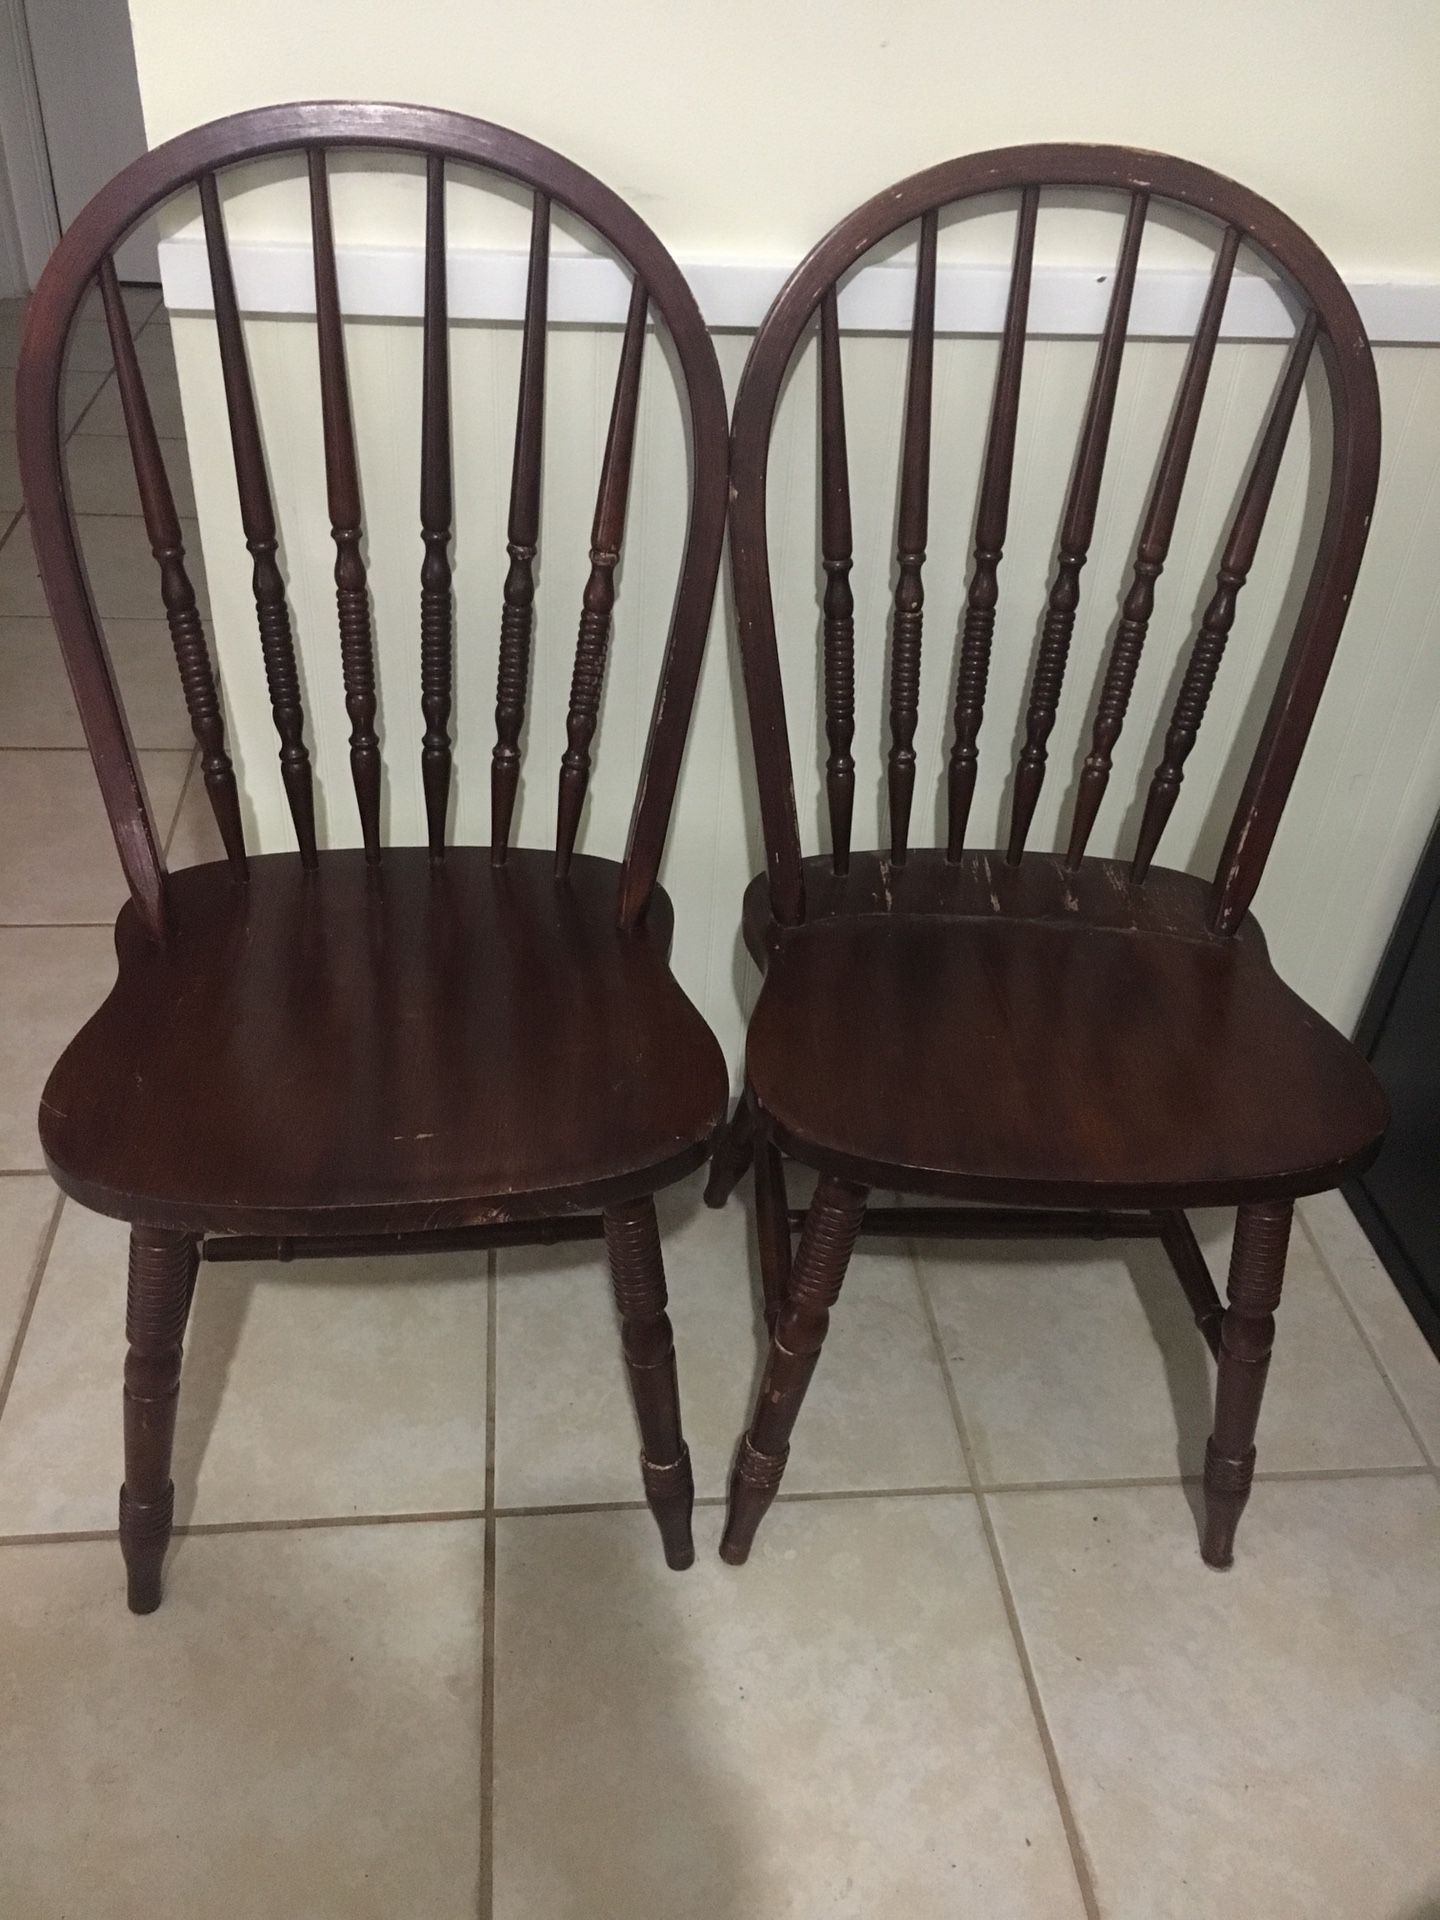 Tow antique chairs